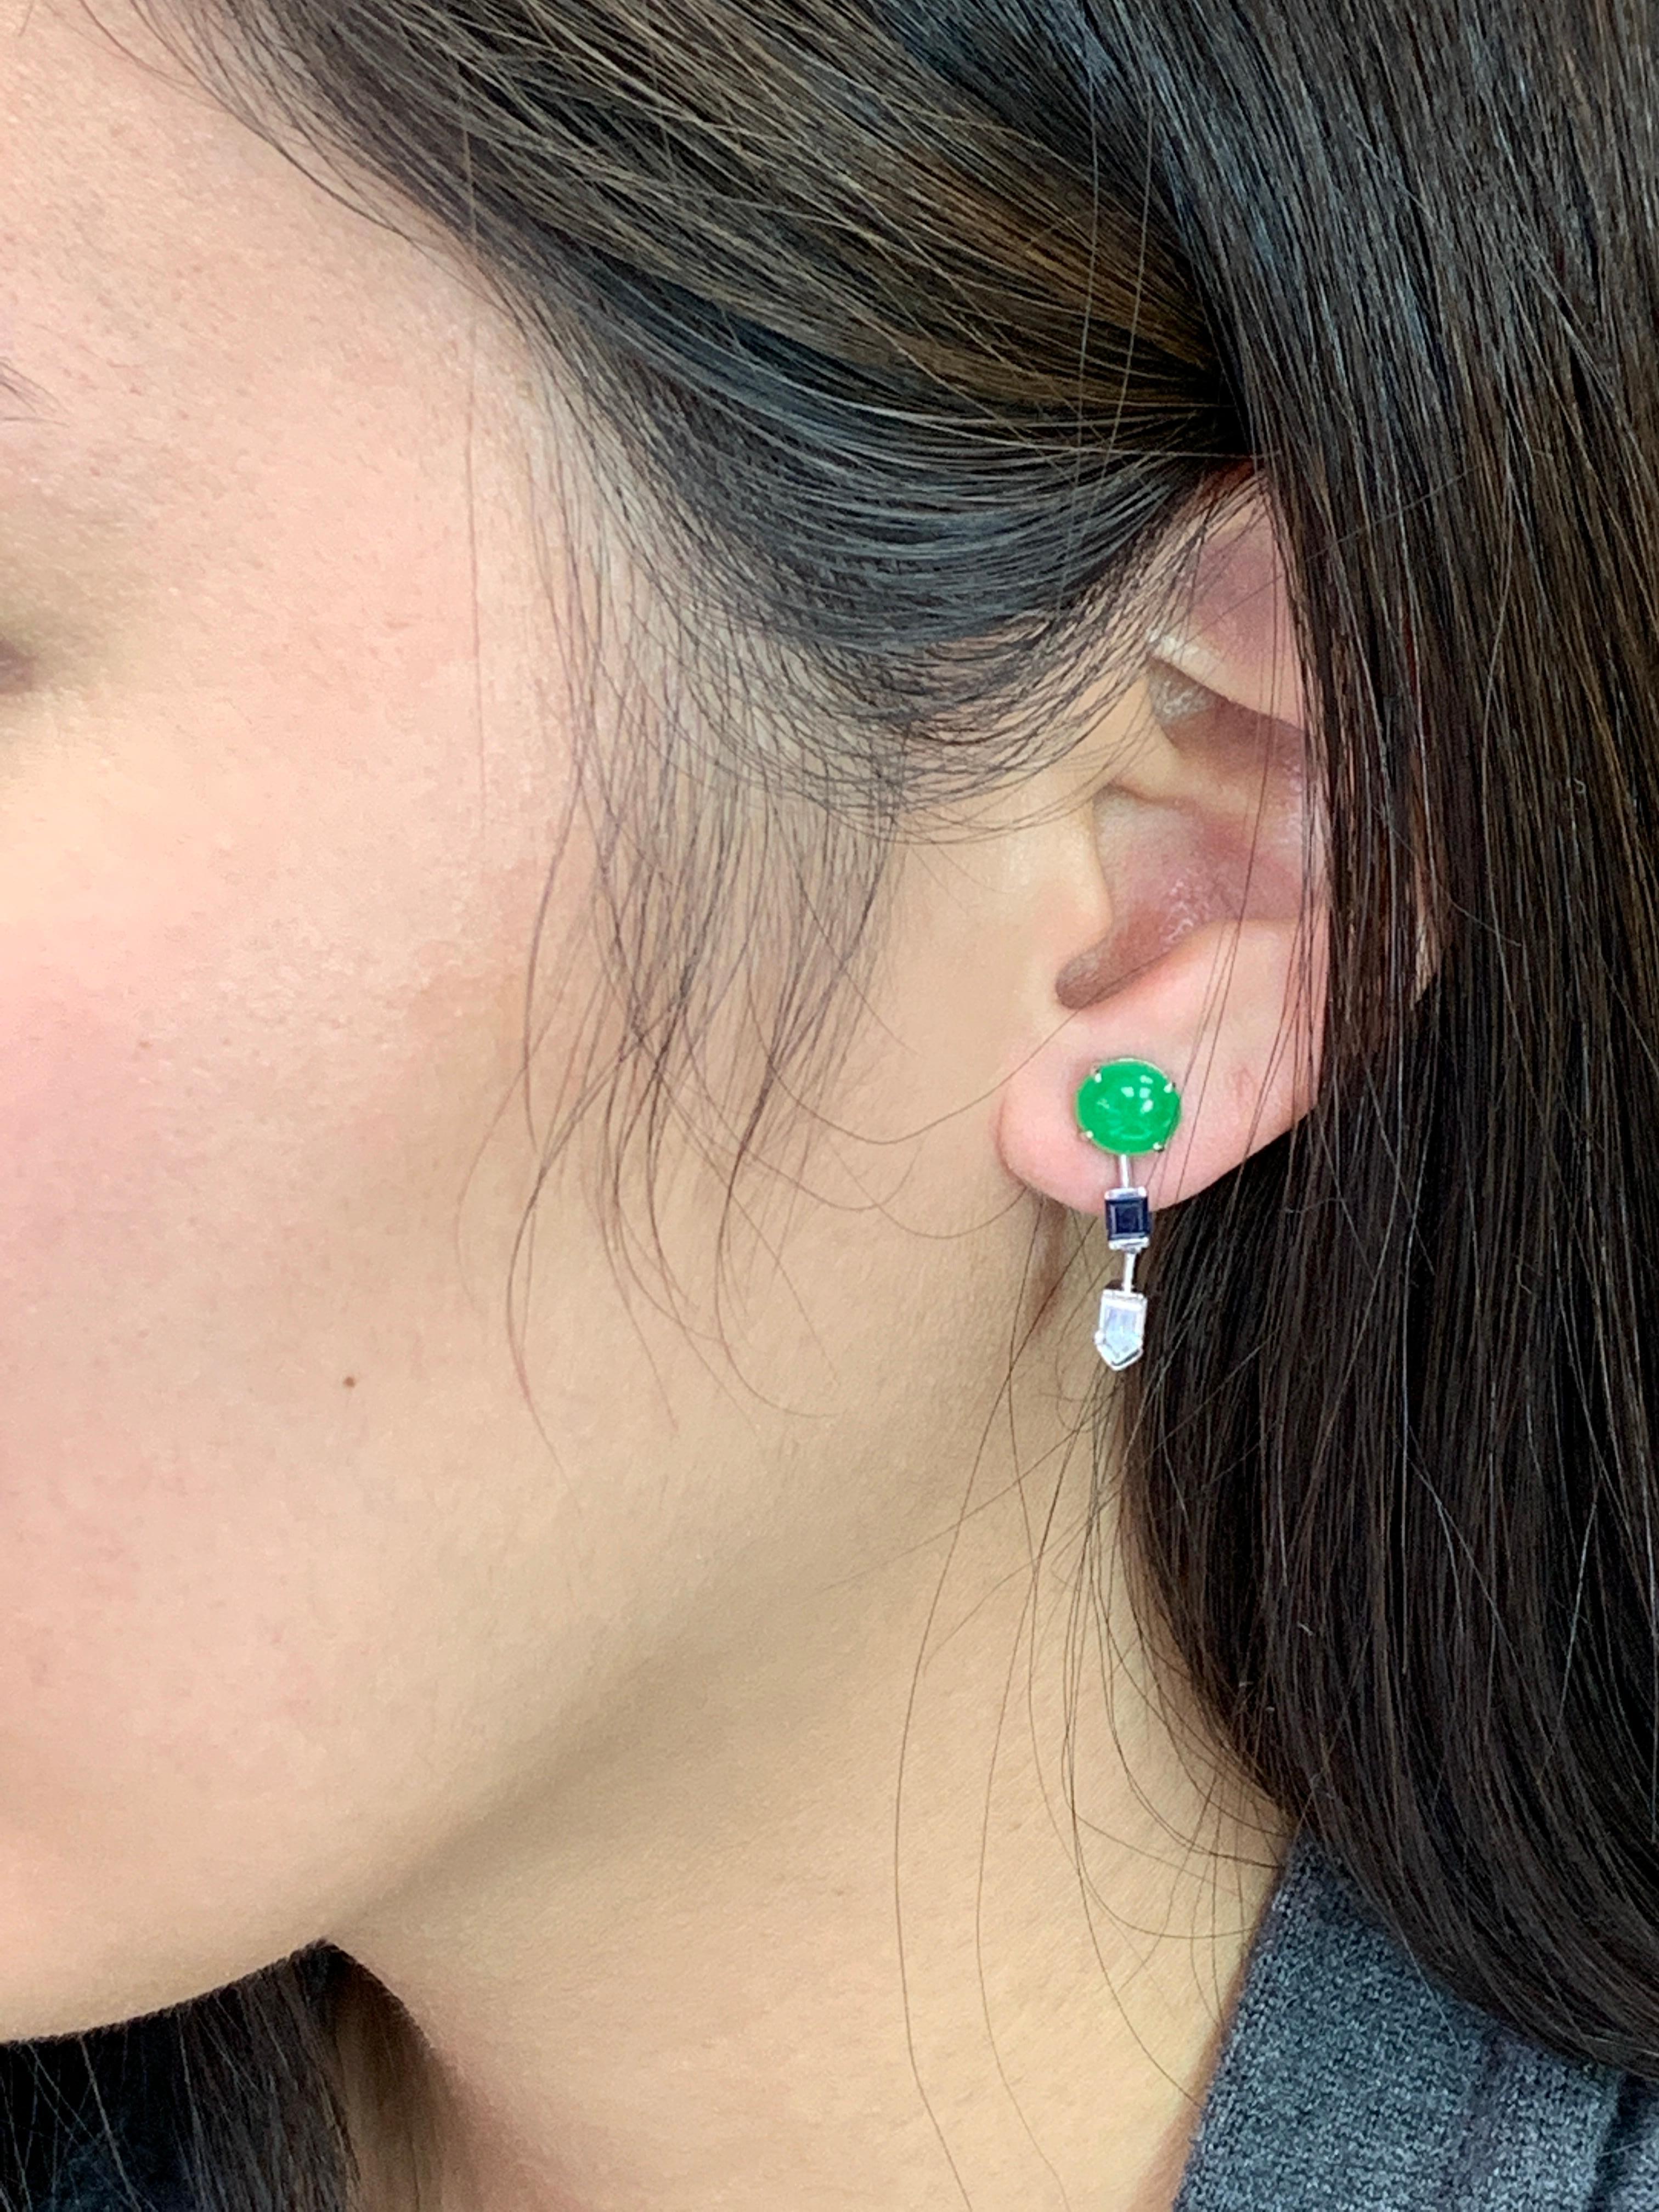 Please check out the HD video! A very unique design. Here is nice apple green jadeite Jade earrings with blue sapphires and diamonds. The apple bright green Jade its certified. The Jades are 3.33Cts, blue sapphires 0.52Cts and 0.68Cts diamonds. The